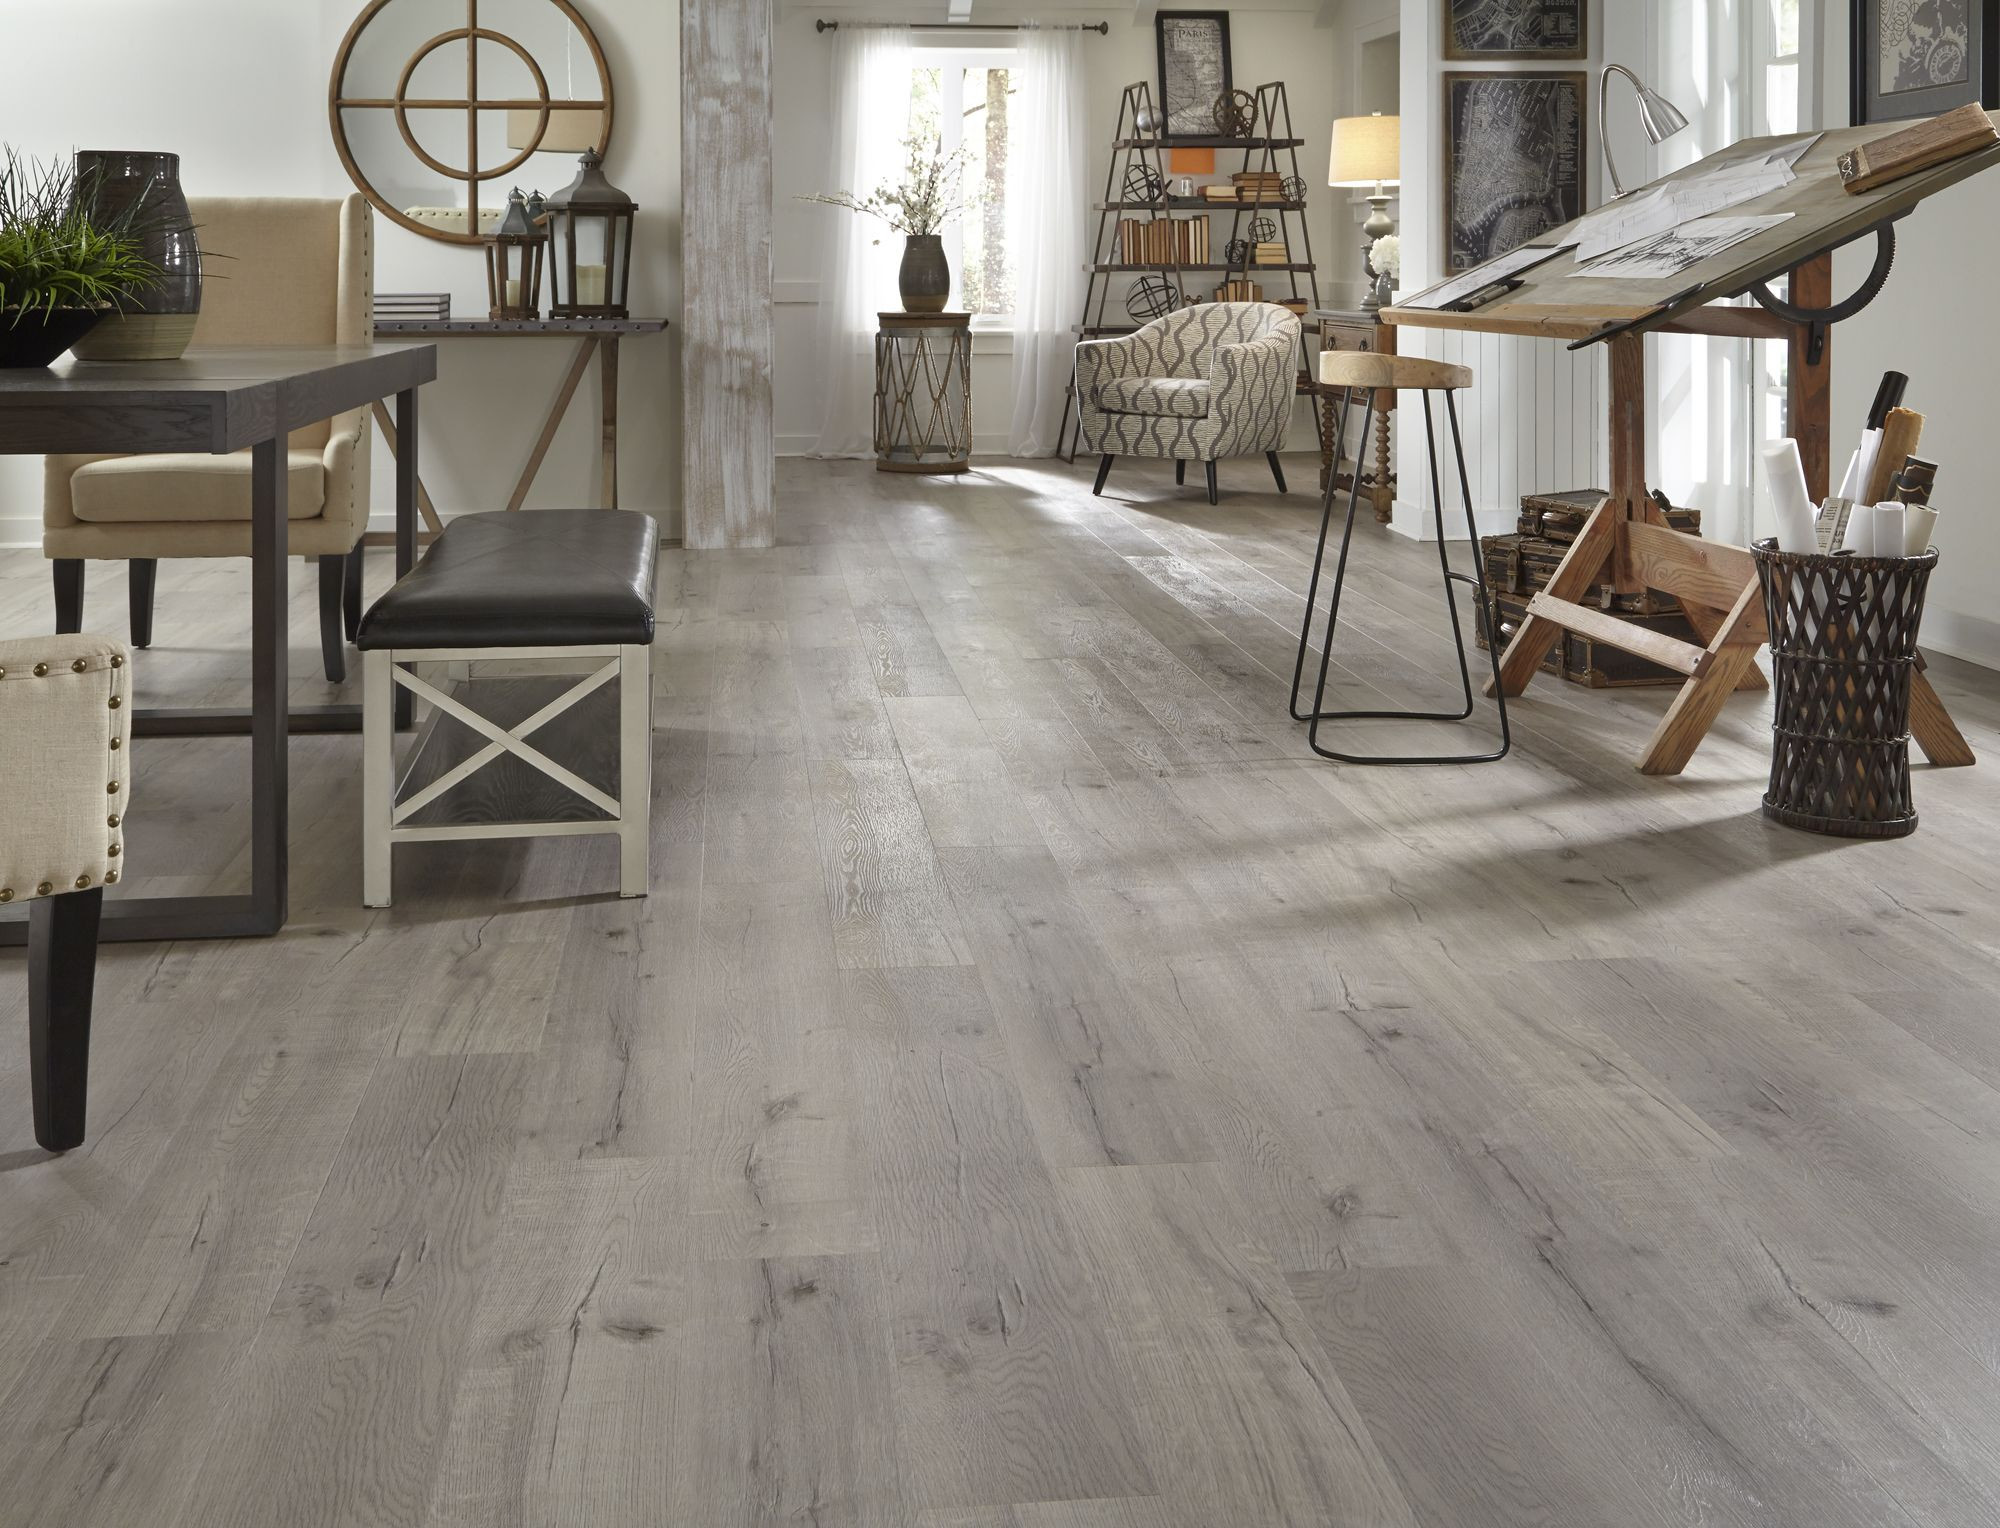 waterproof hardwood floor finish of this fall flooring season see 100 new flooring styles like driftwood with regard to this fall flooring season see 100 new flooring styles like driftwood hickory evp its part of a new line of waterproof flooring thats ideal for any space